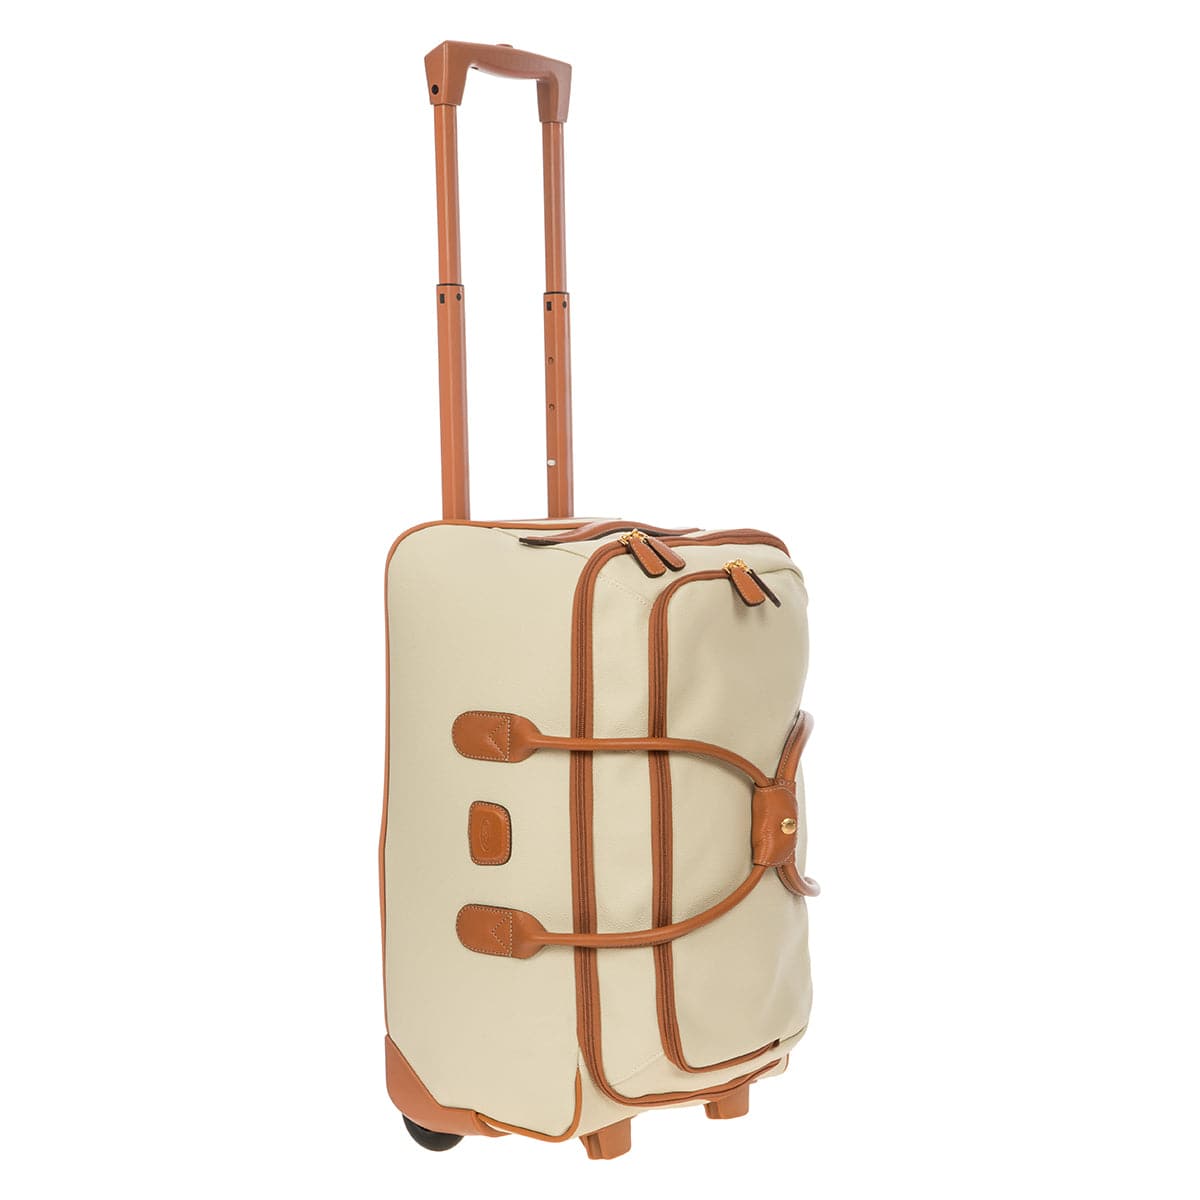 Bric's Firenze 21" Carry-On Rolling Duffle Bag